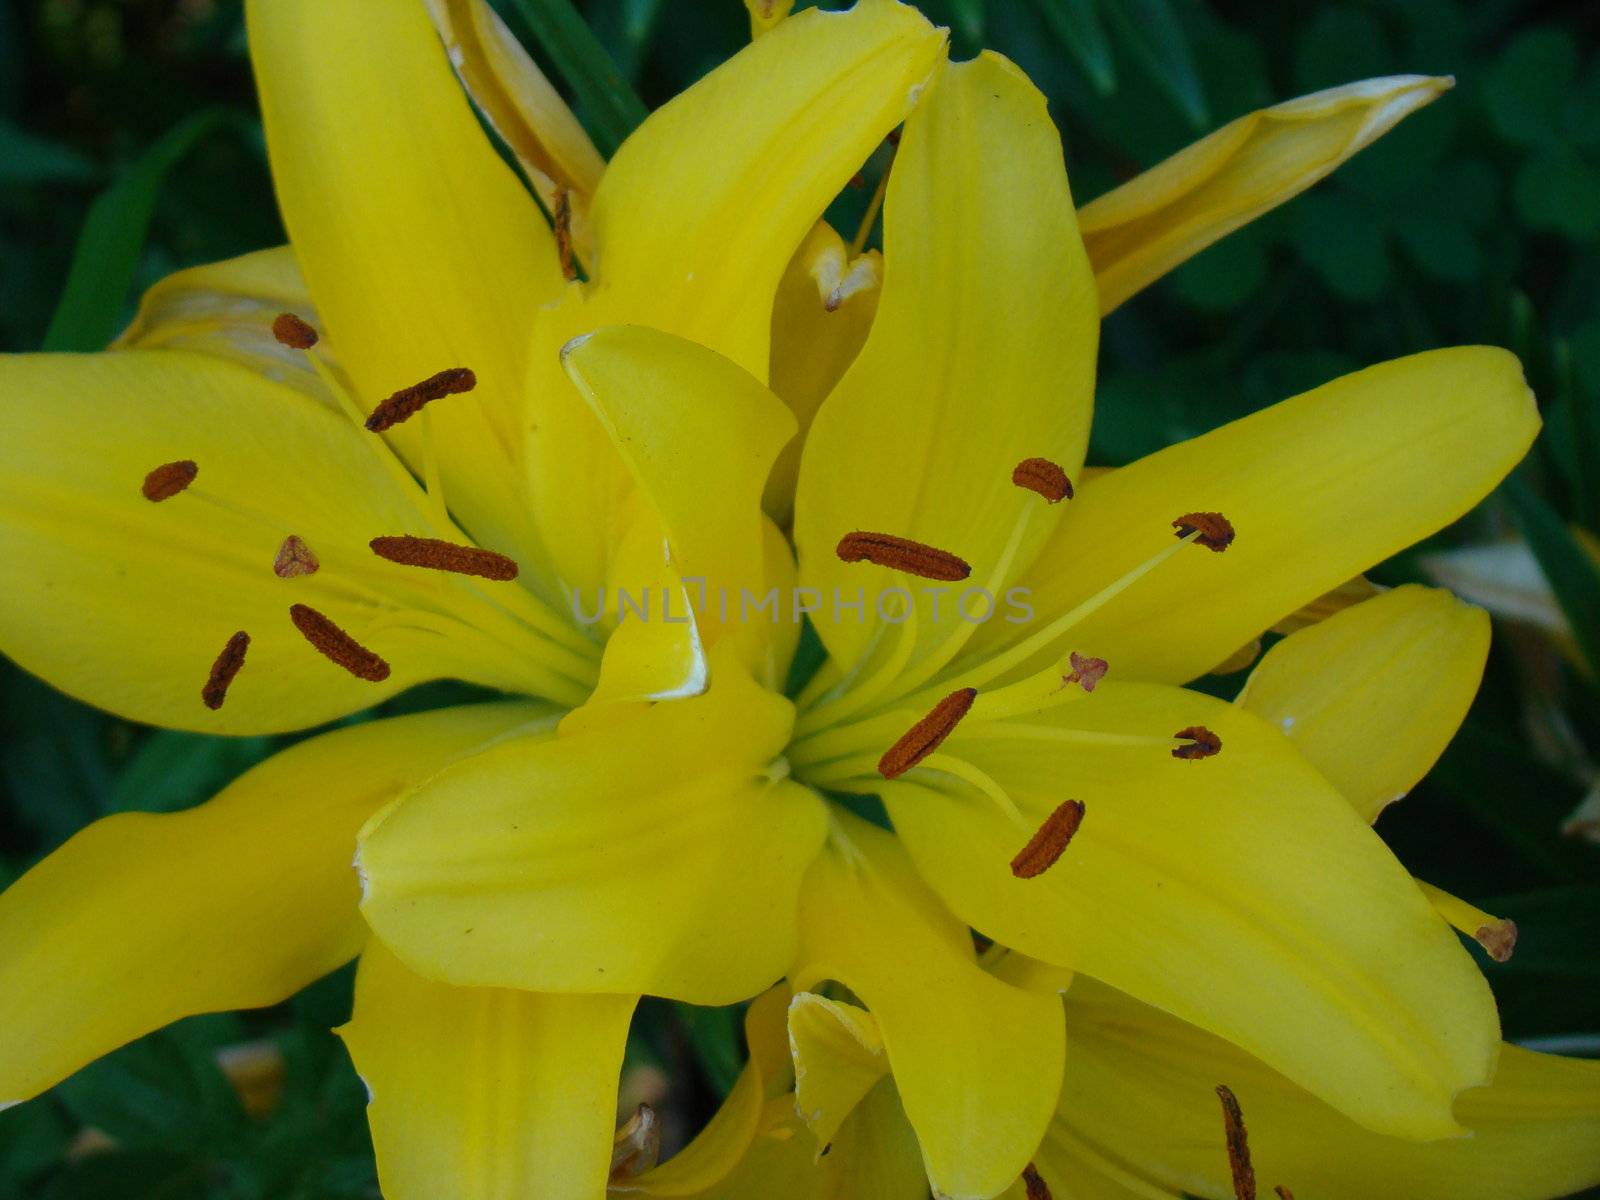 yellow tiger lilly with surrounding flora such as bud about to open leafs.